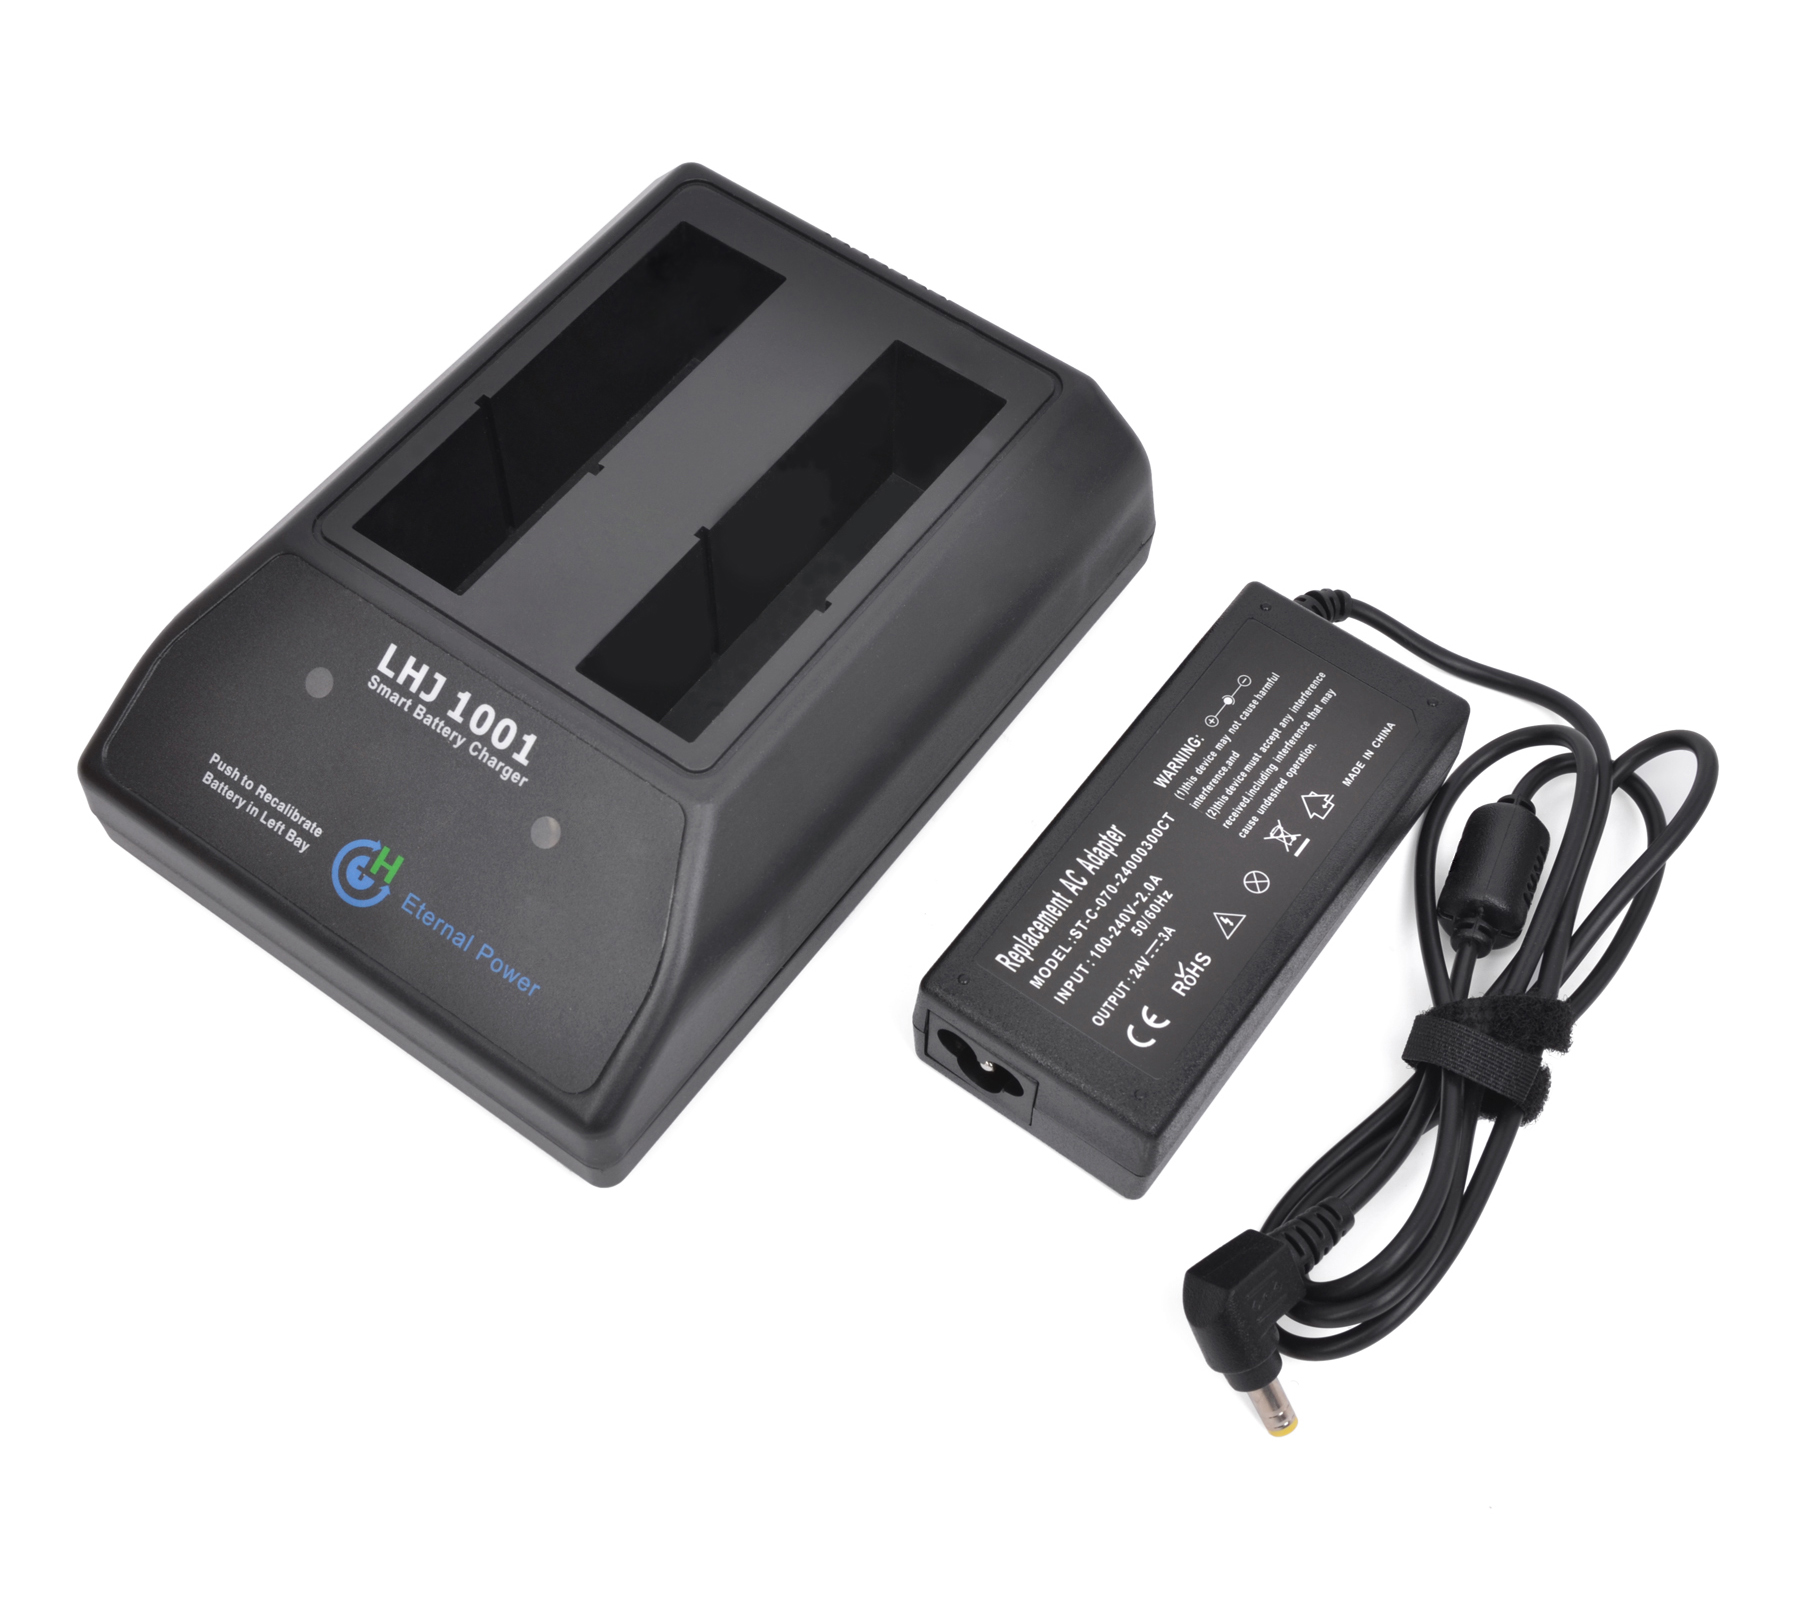 Li202S Li202SX ME202C ME202EK M4605A SM204 MTS-6000 LI204SX JD1600LP Battery Charger Adapter